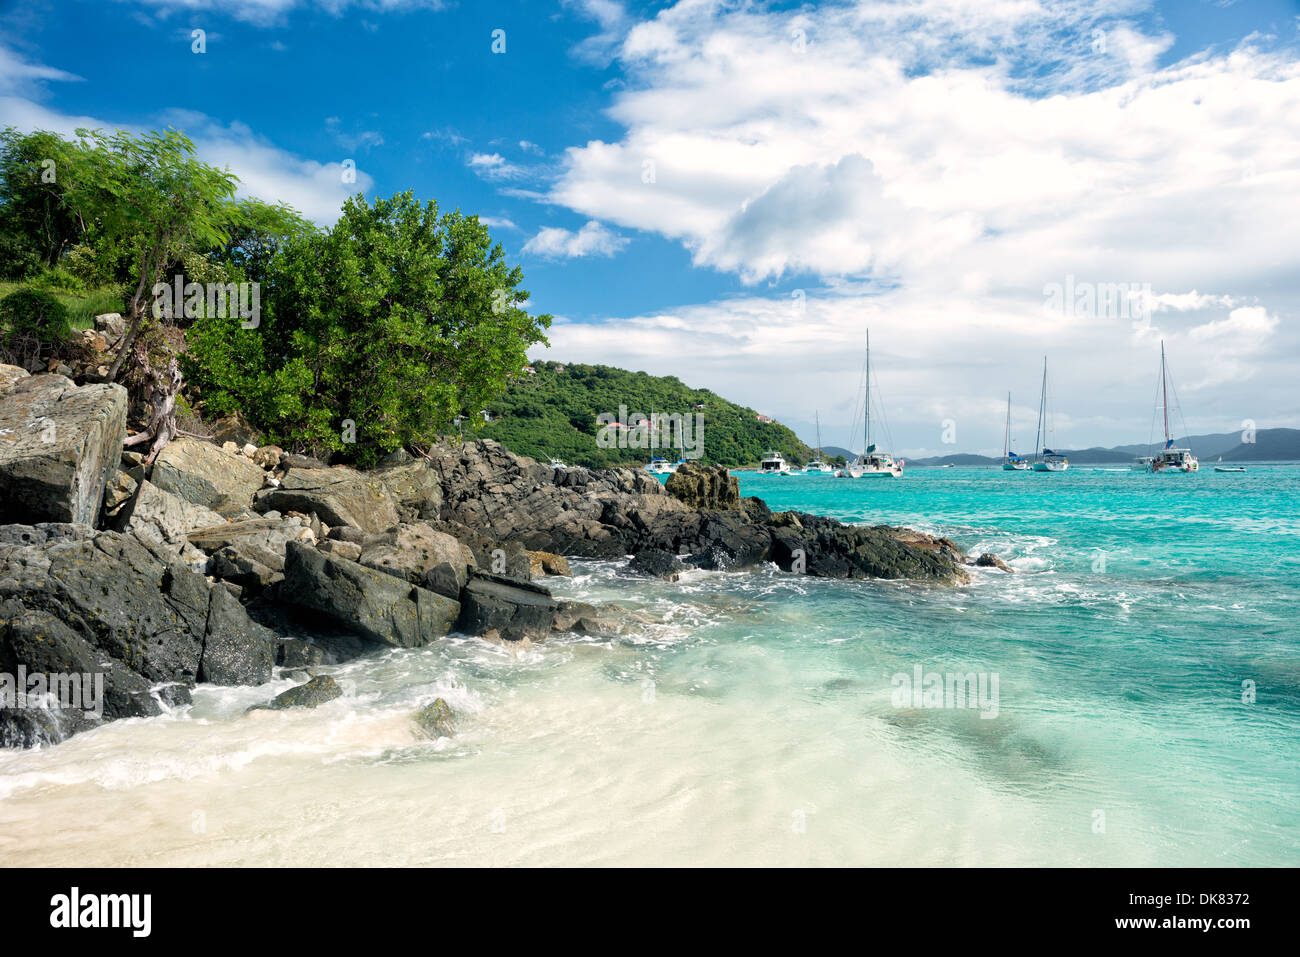 A small rocky headland at the northern end of White Bay on Jost Van Dyke in the British Virgin Islands in the Caribbean. Stock Photo